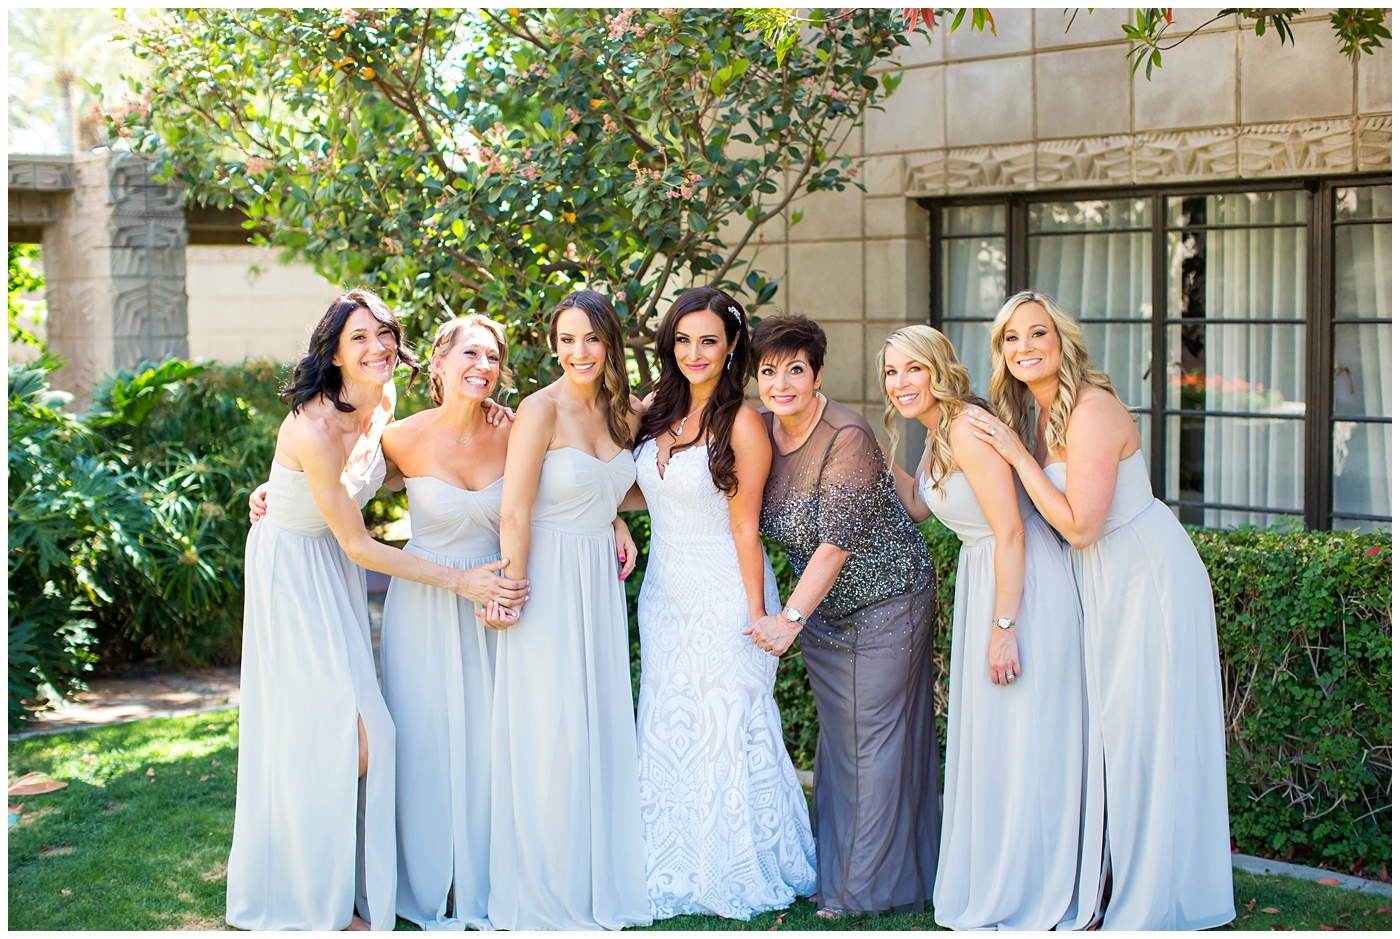 bride in dress with thin straps getting ready with bridesmaids in champagne color dresses